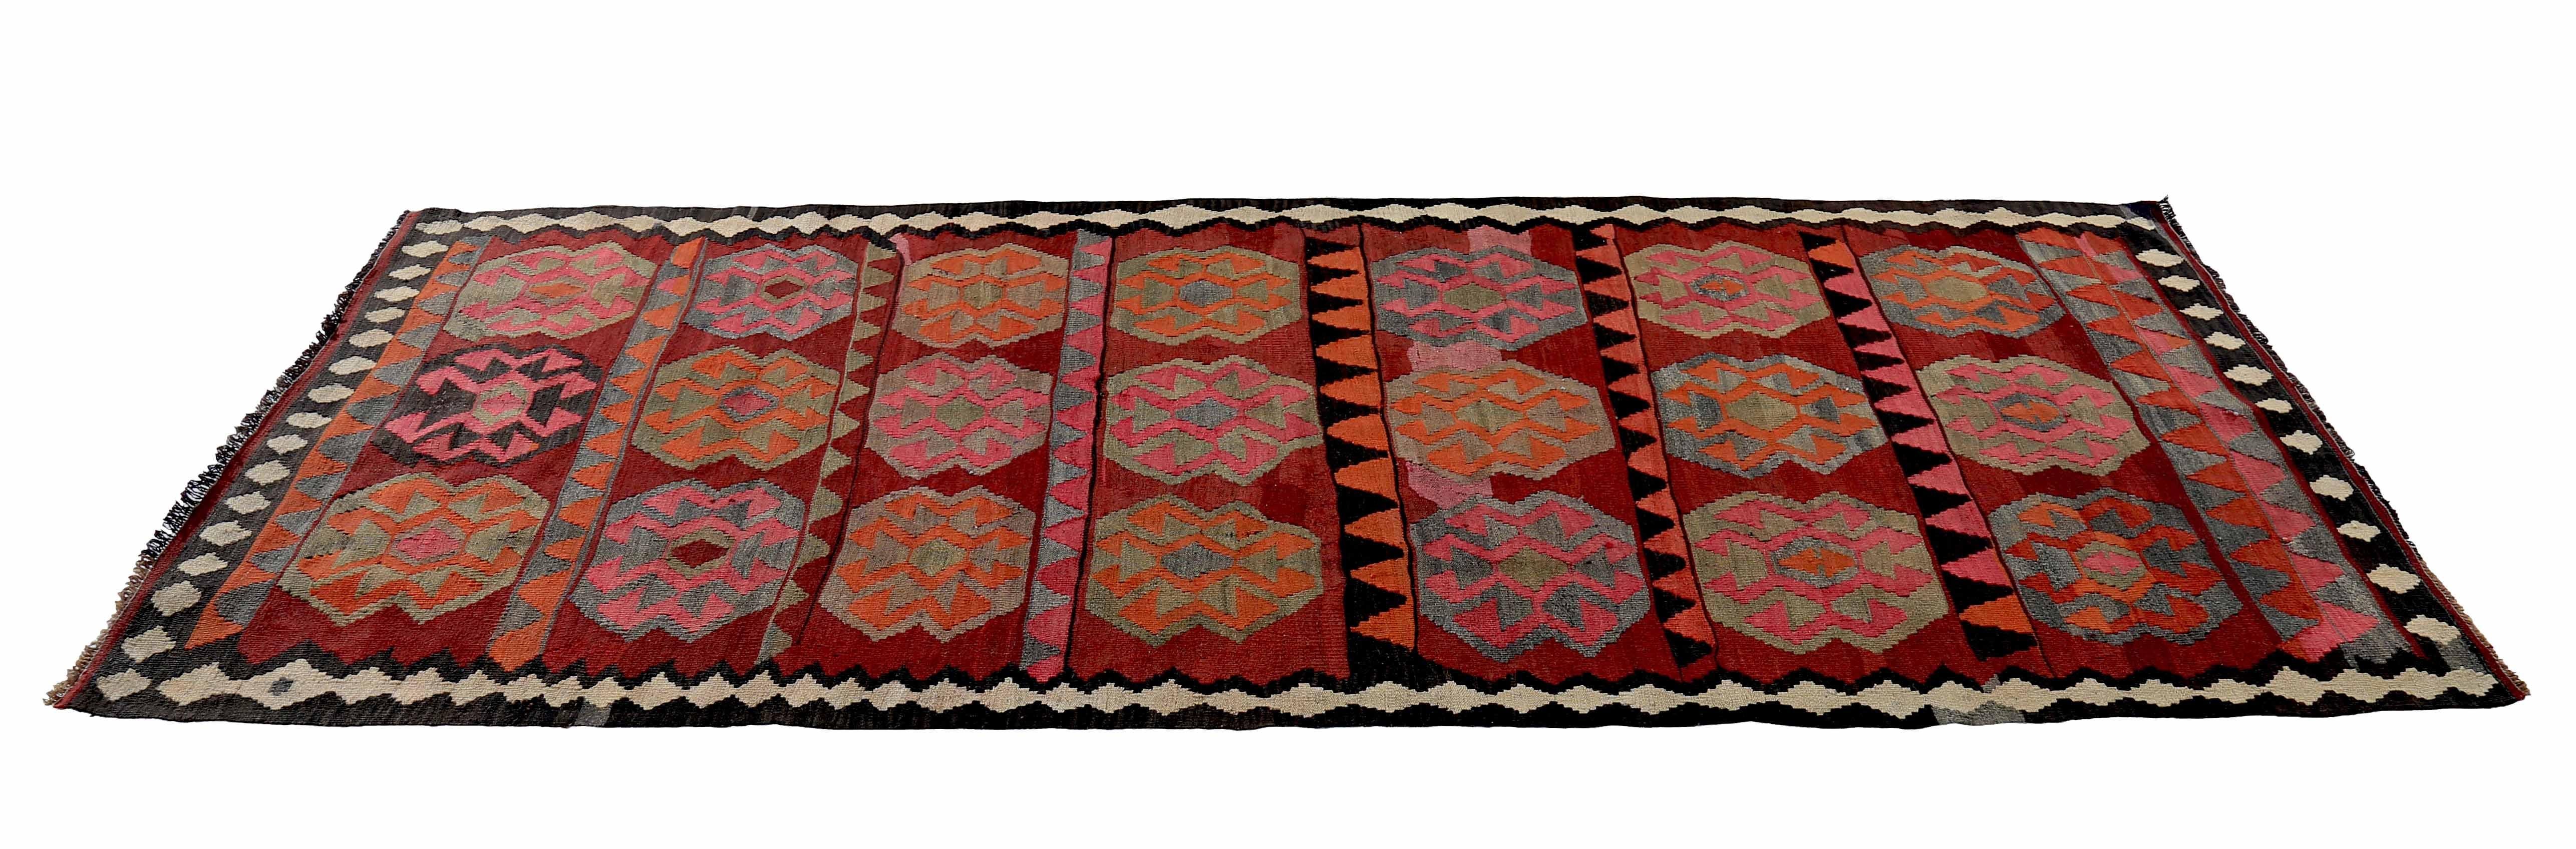 Hand-Woven Modern Turkish Kilim Runner Rug with Orange and Pink Tribal Medallions For Sale